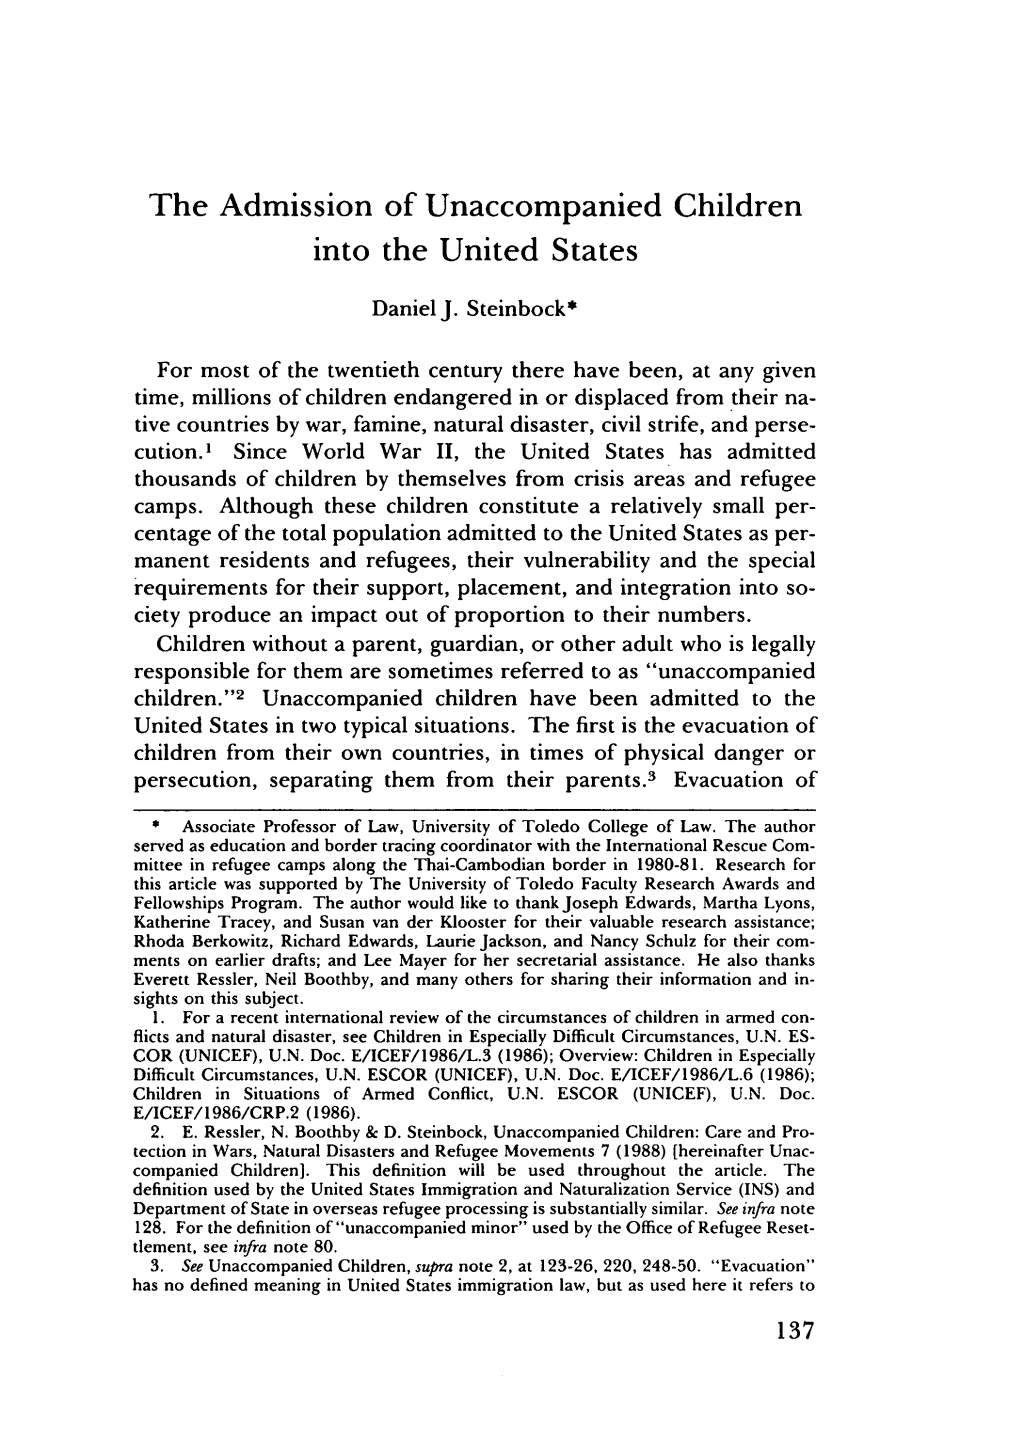 The Admission of Unaccompanied Children Into the United States